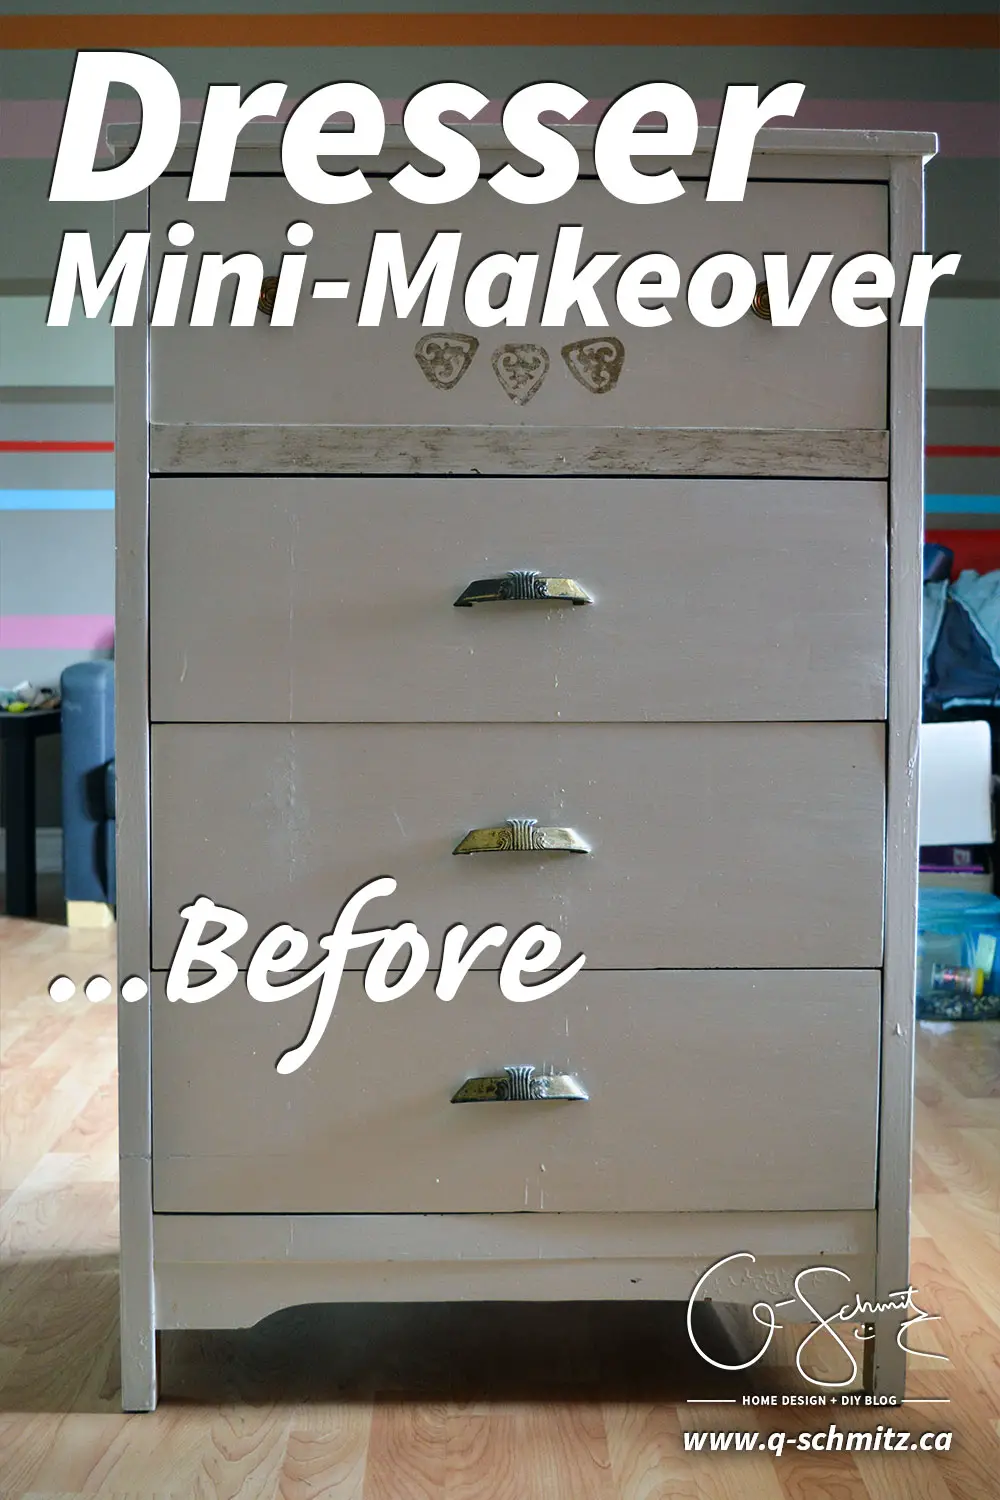 Sometimes you don't need to do a huge DIY to get the furniture look you want. See how a dresser mini-makeover can work just as well!